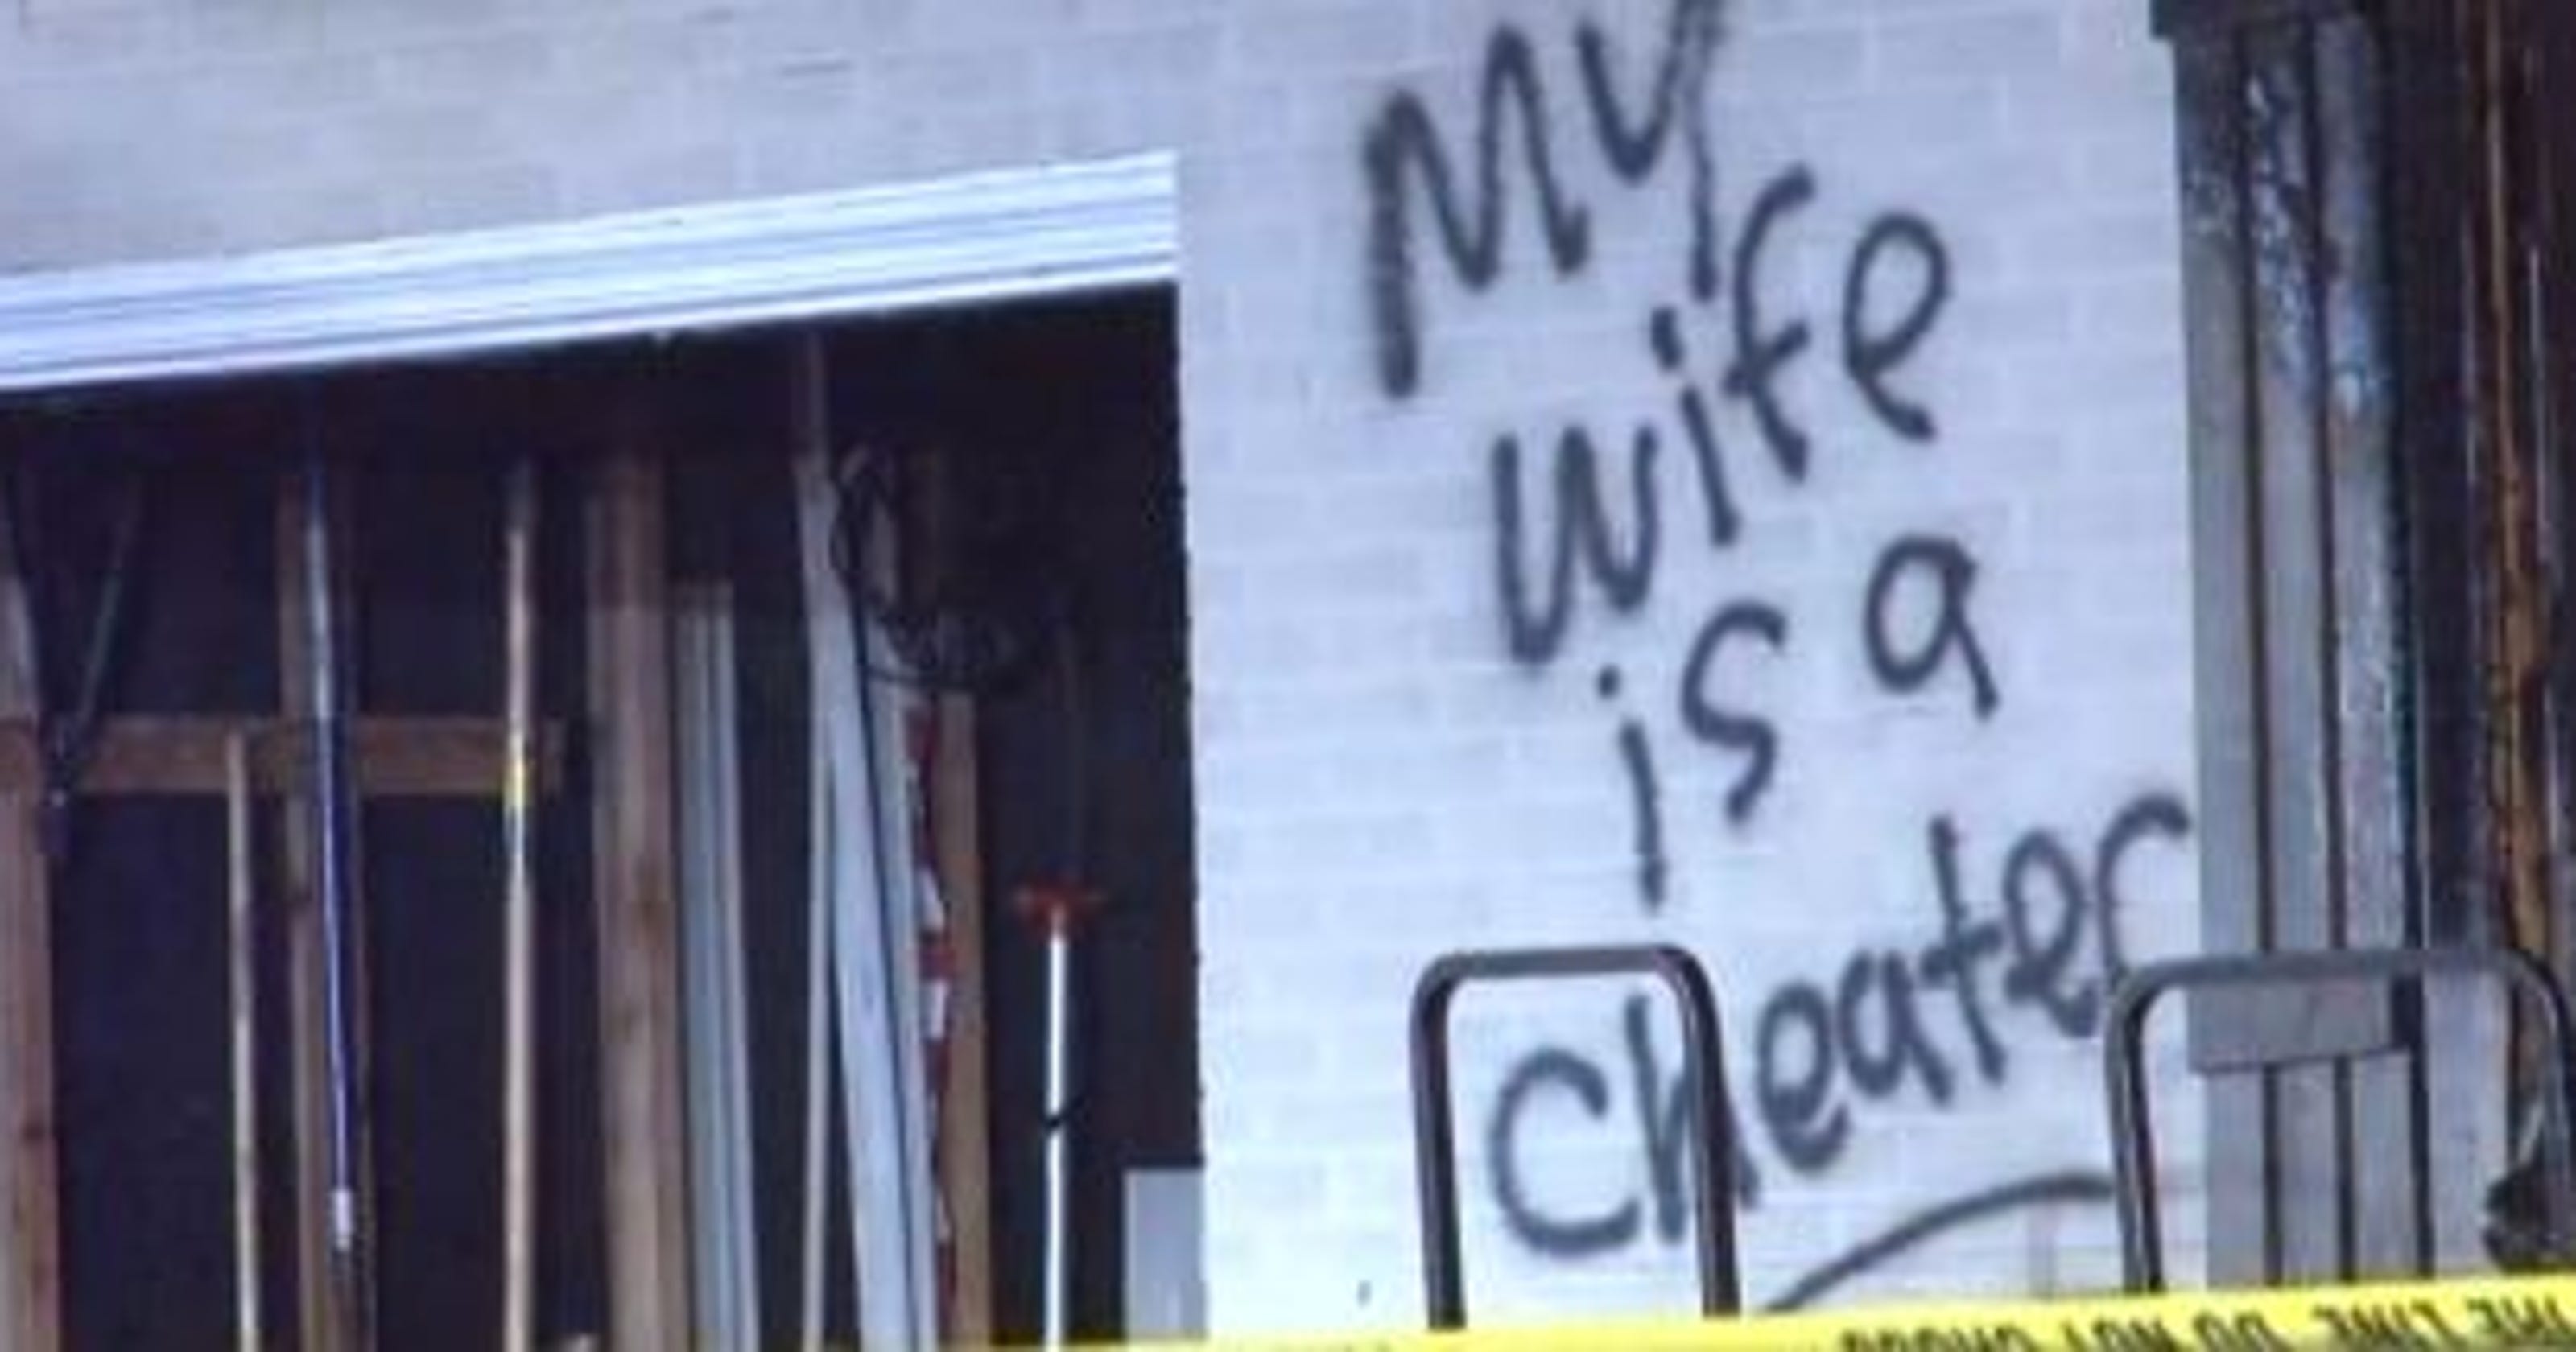 My Wife Is A Cheater Written On House Set Ablaze